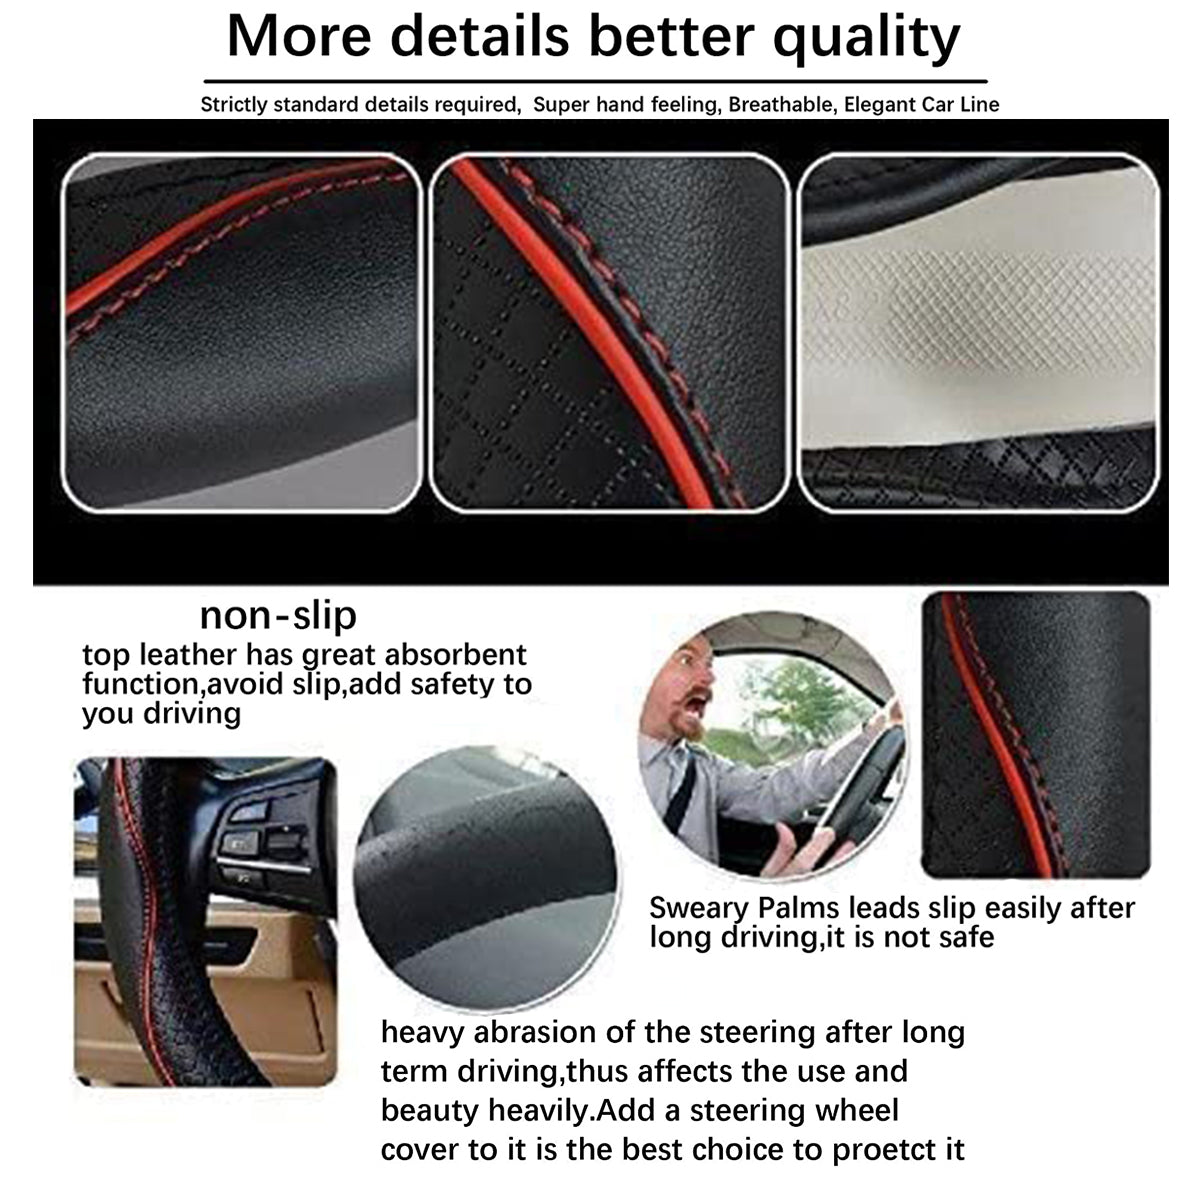 Car Steering Wheel Cover, Custom For Your Cars, Anti-Slip, Safety, Soft, Breathable, Heavy Duty, Thick, Full Surround, Sports Style, Car Accessories TS18990